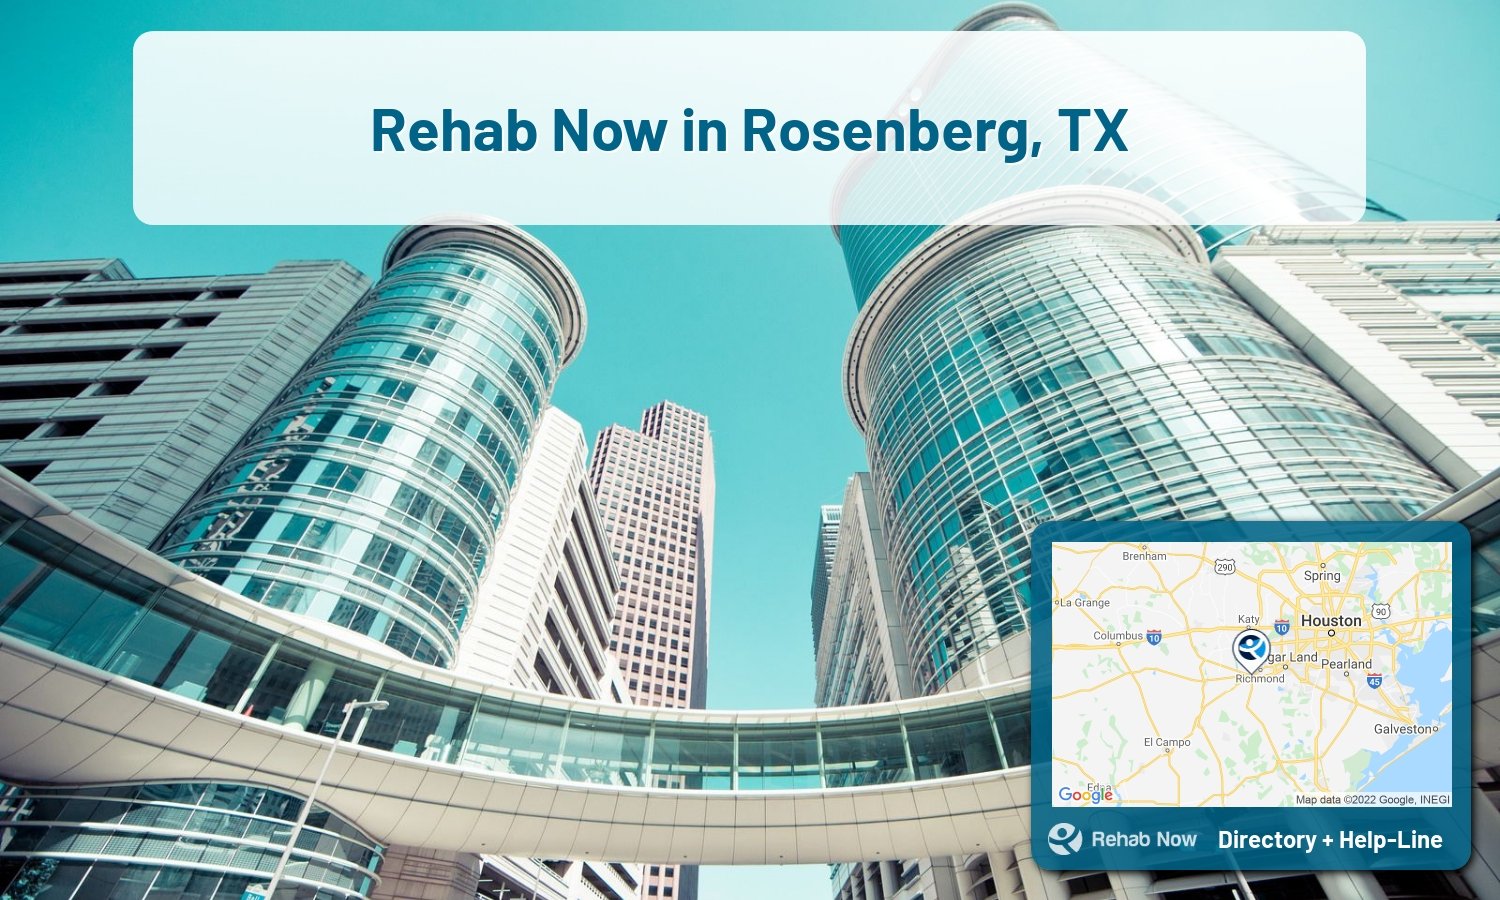 Our experts can help you find treatment now in Rosenberg, Texas. We list drug rehab and alcohol centers in Texas.